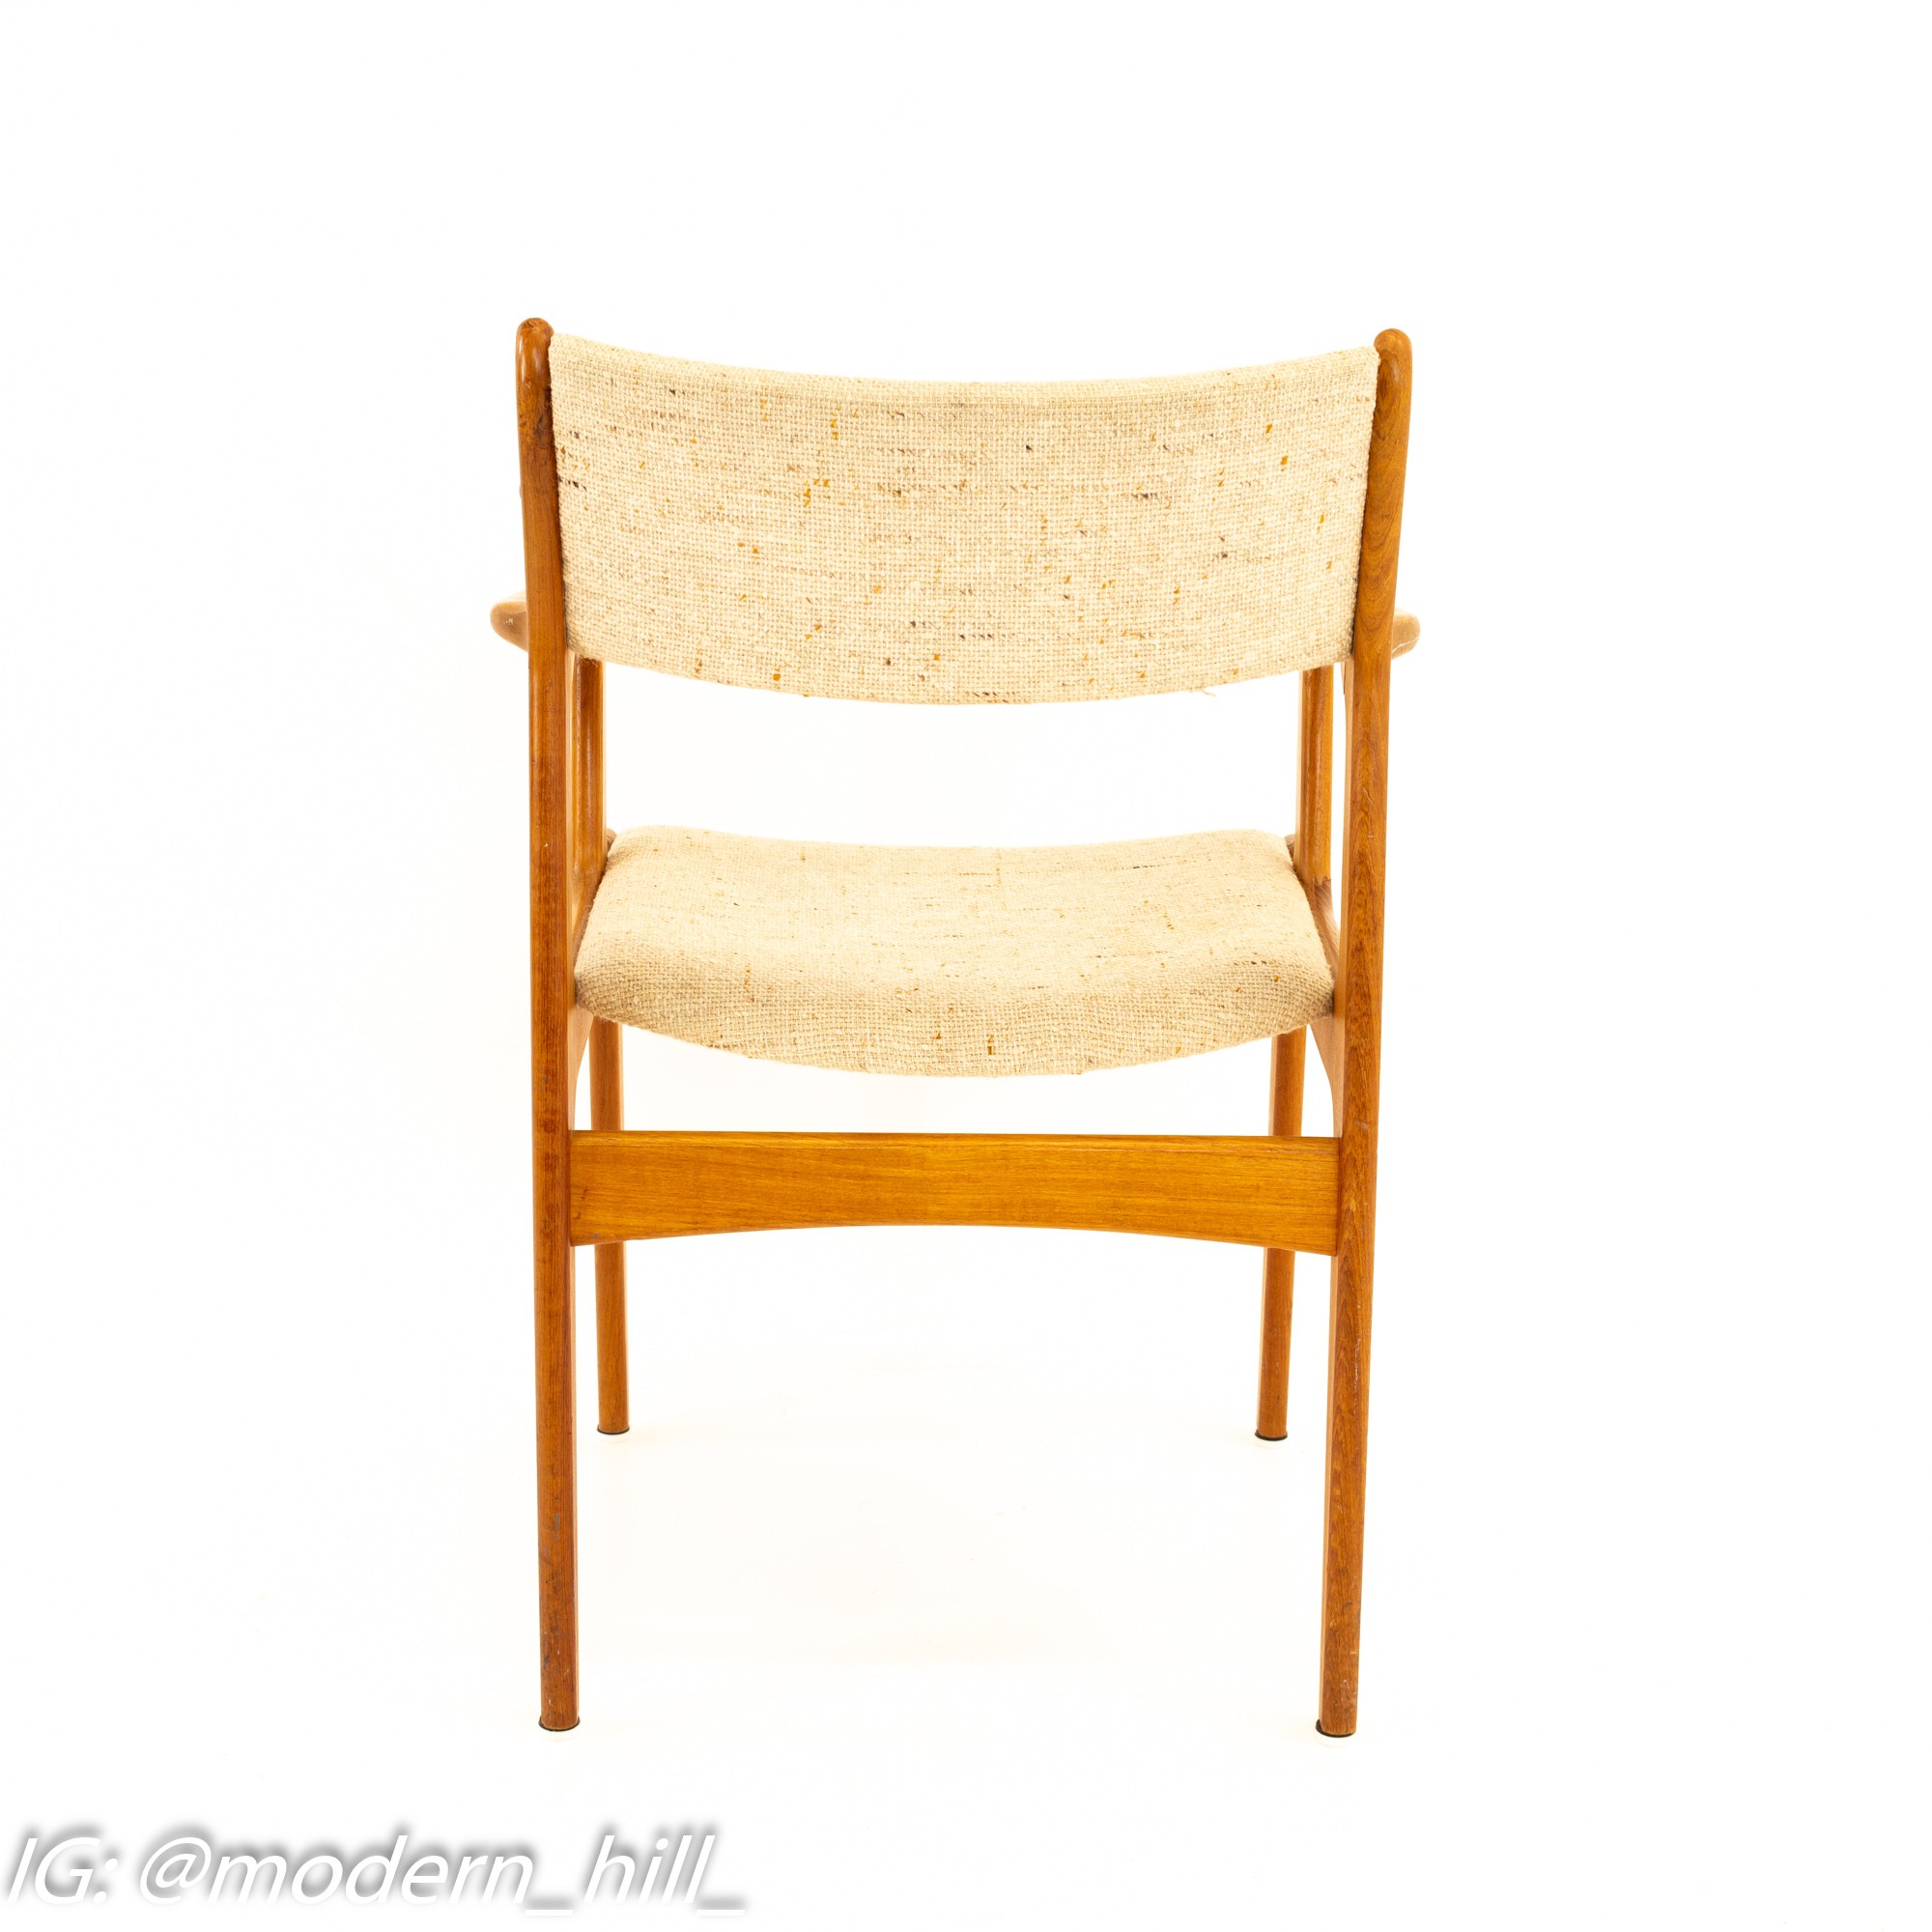 D Scan Mid Century Teak Dining Chairs - Set of 5